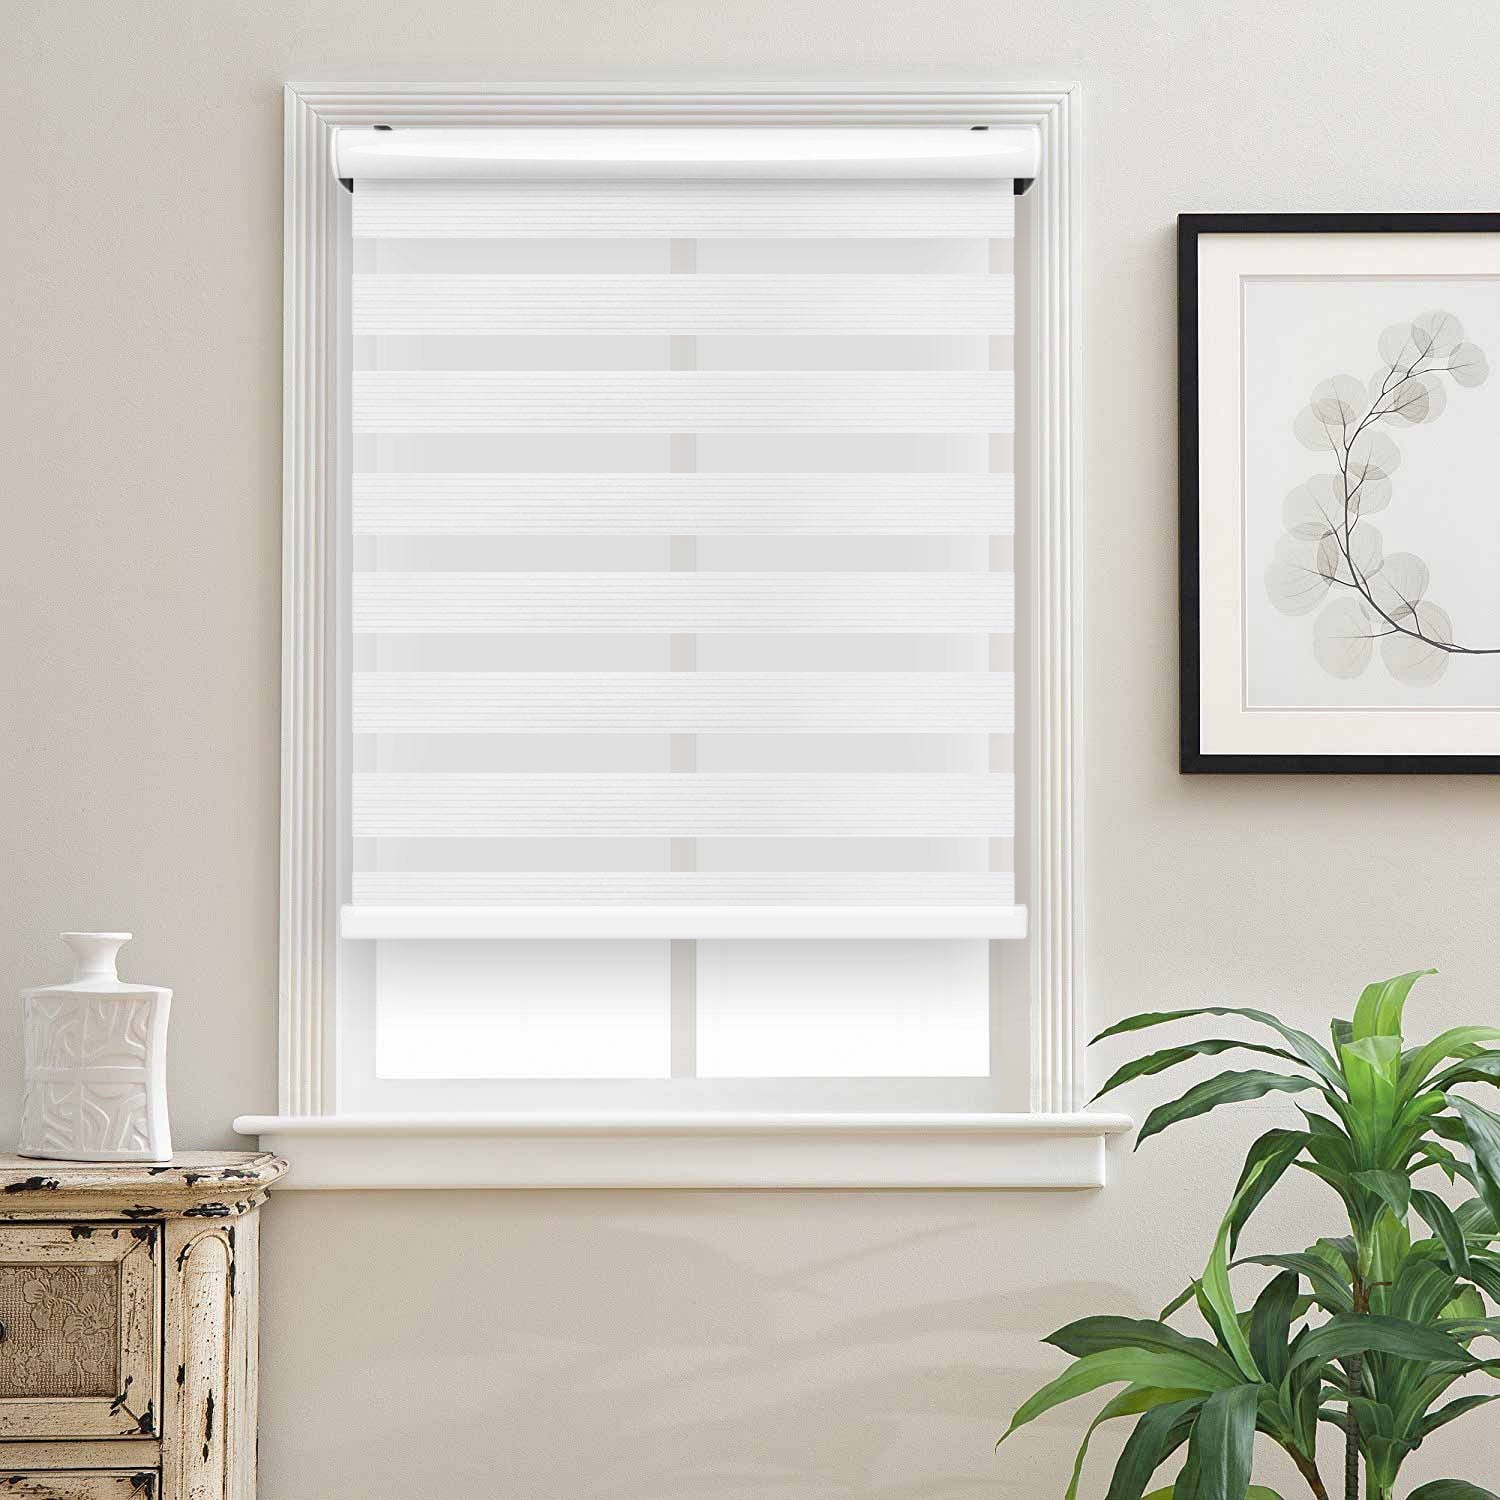 Cordless Blackout Roller Shades Free-Stop Dual Layer Zebra Blinds 55"x72" 